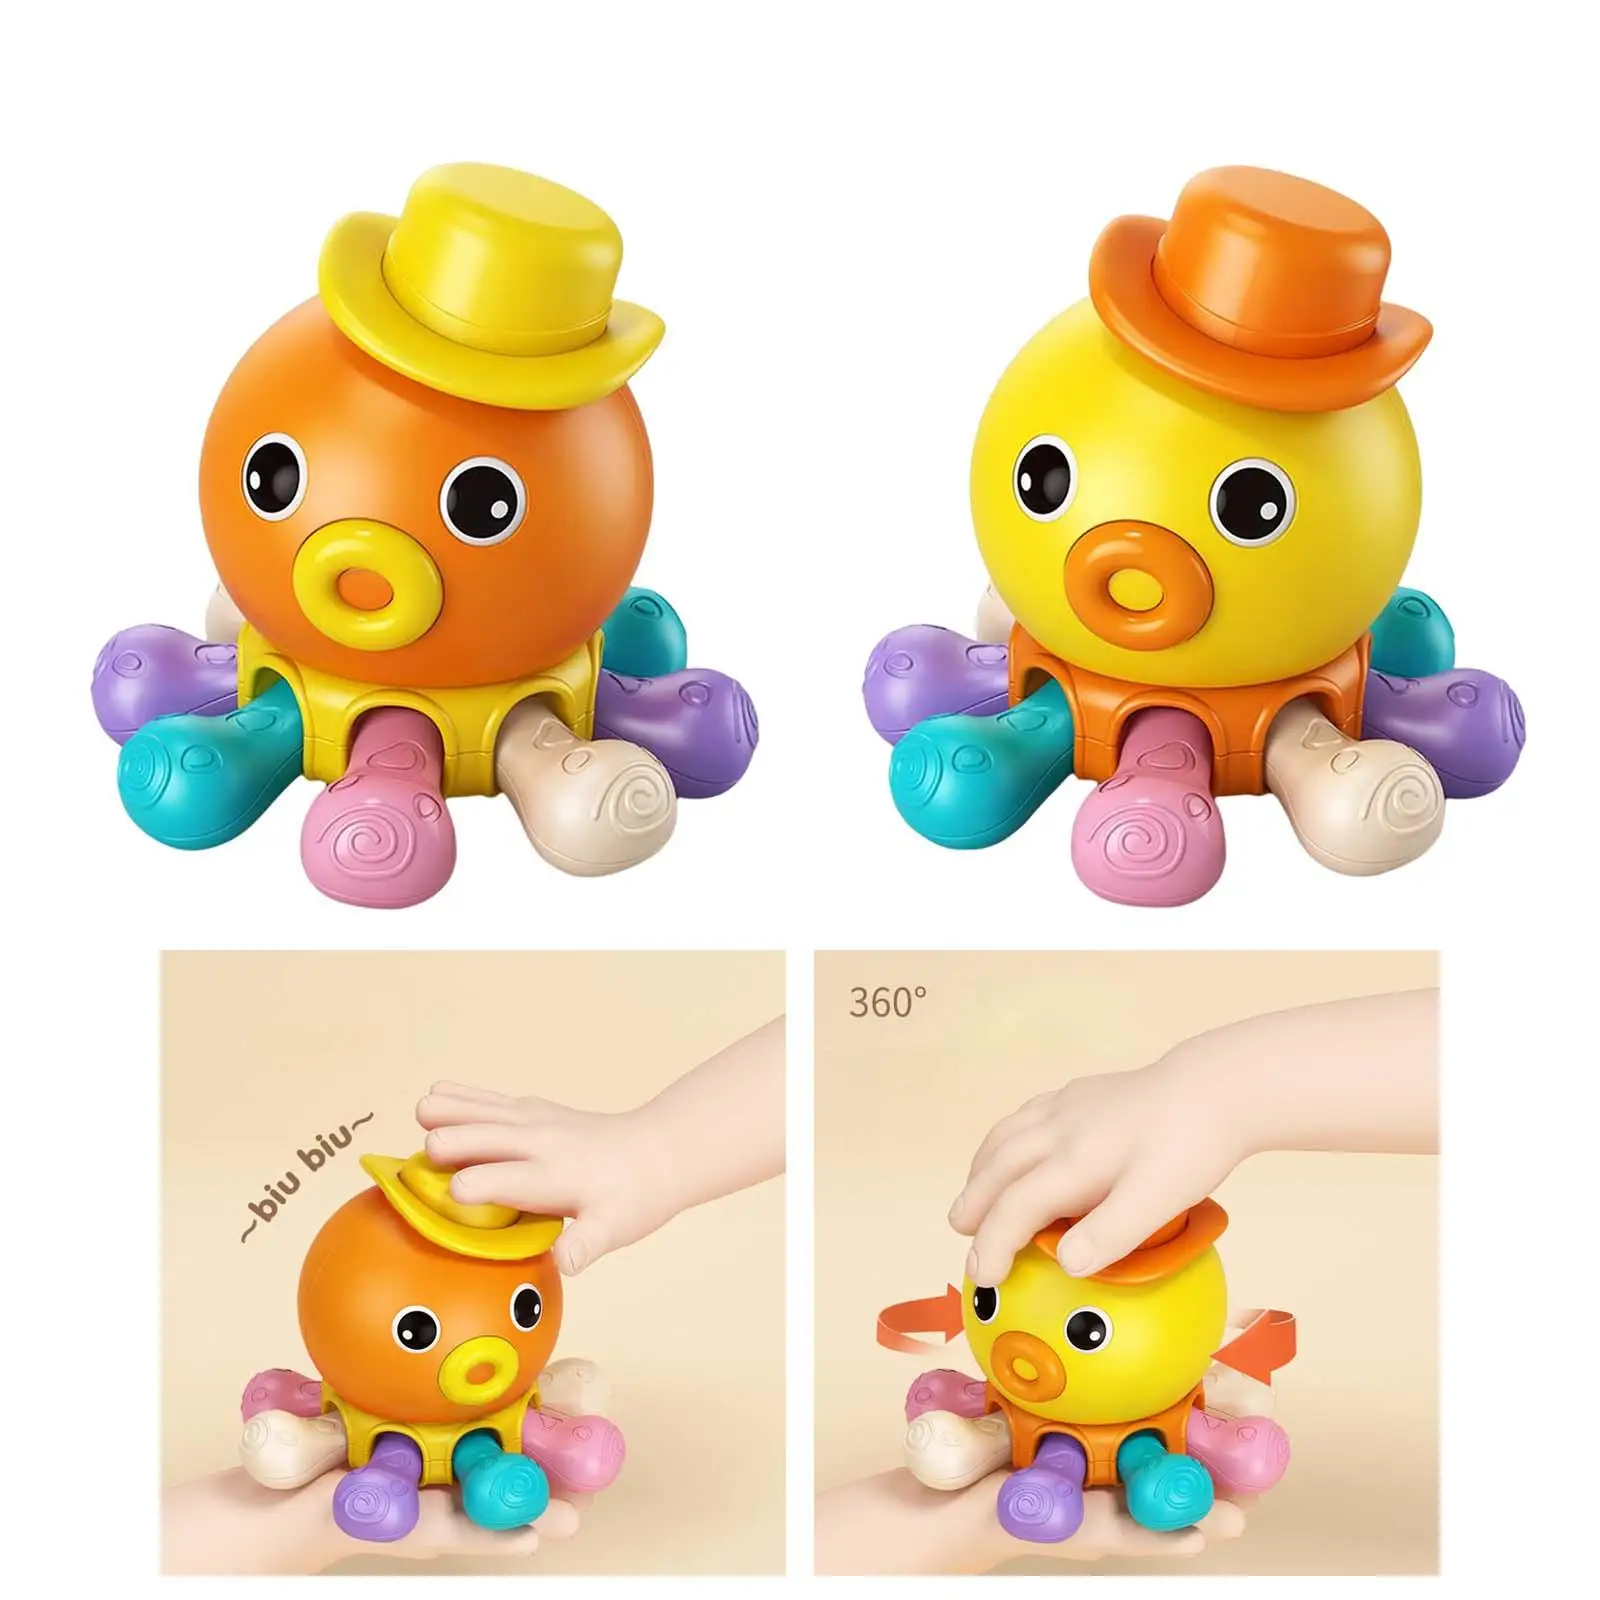 Baby Decompression Puzzle Toys Kids Education Toy for Infant Birthday Gifts